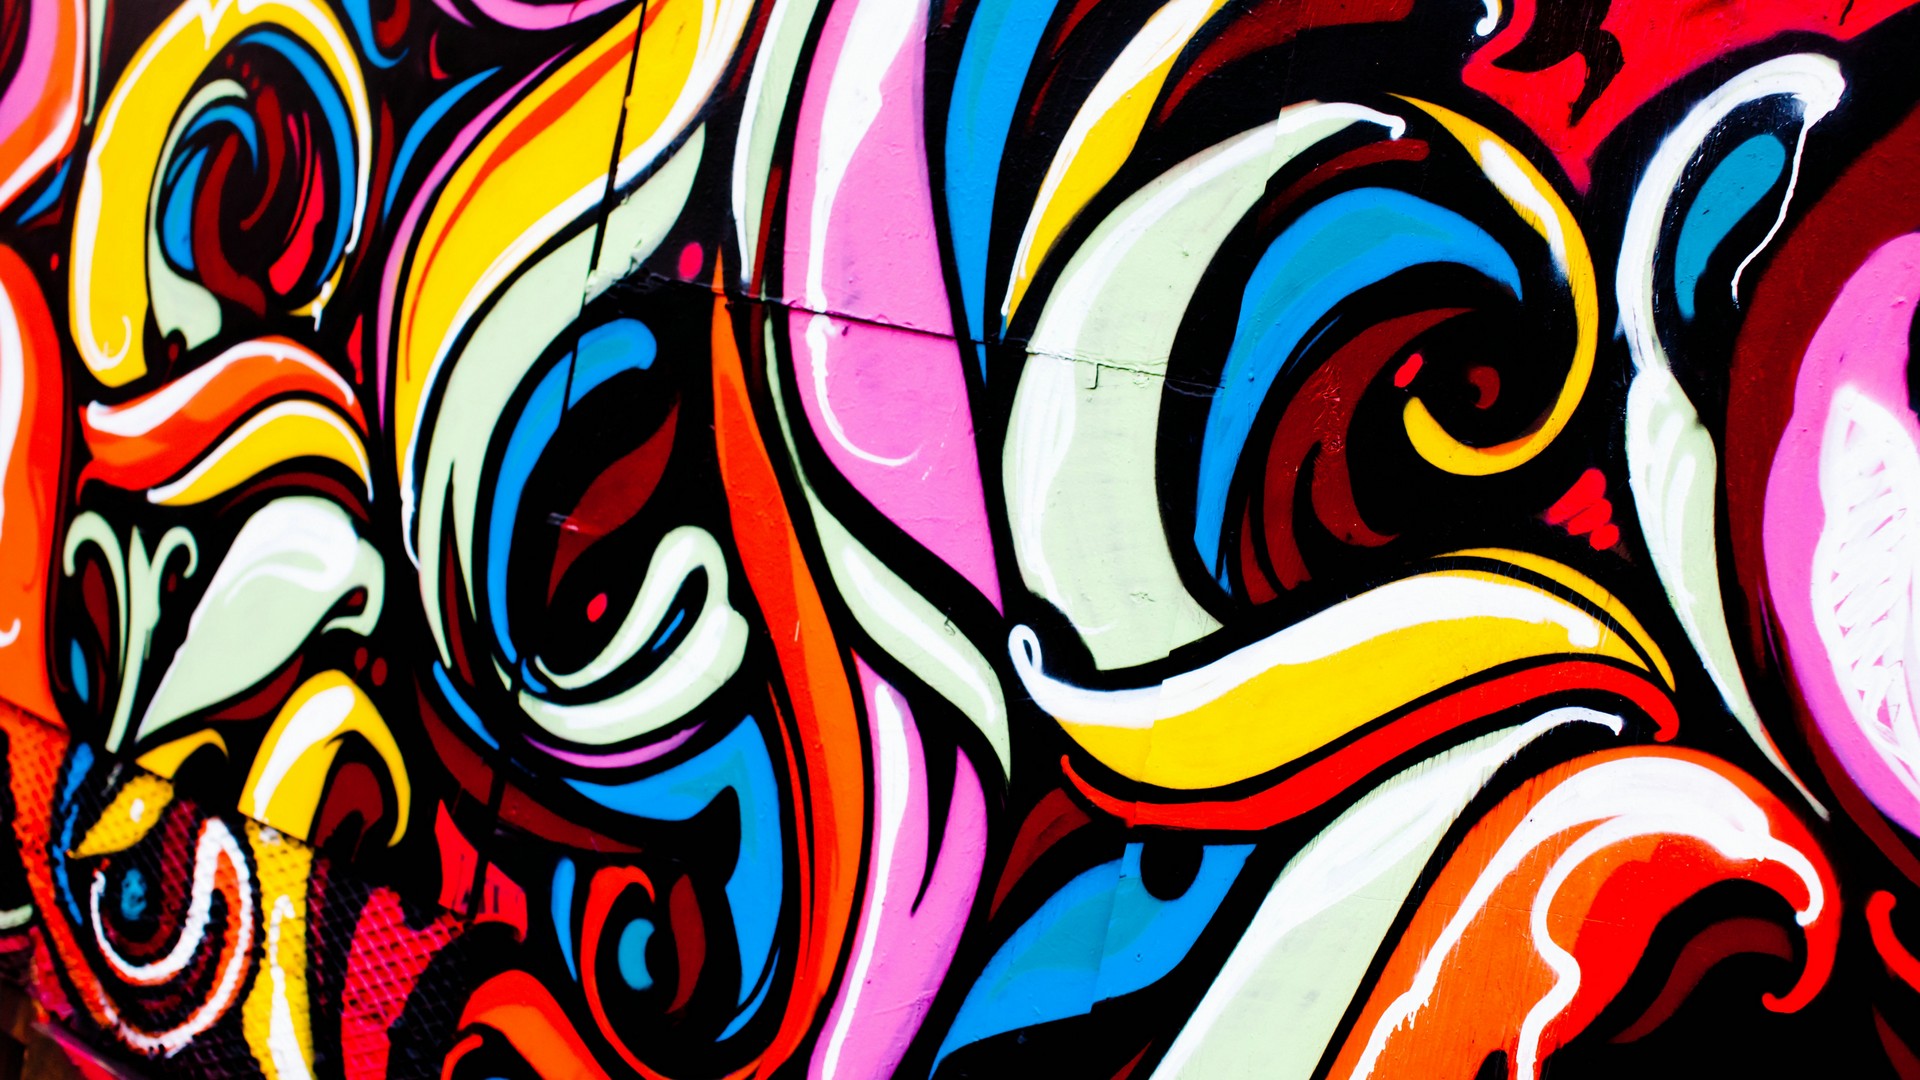 Desktop Wallpaper Graffiti Tag with image resolution 1920x1080 pixel. You can use this wallpaper as background for your desktop Computer Screensavers, Android or iPhone smartphones